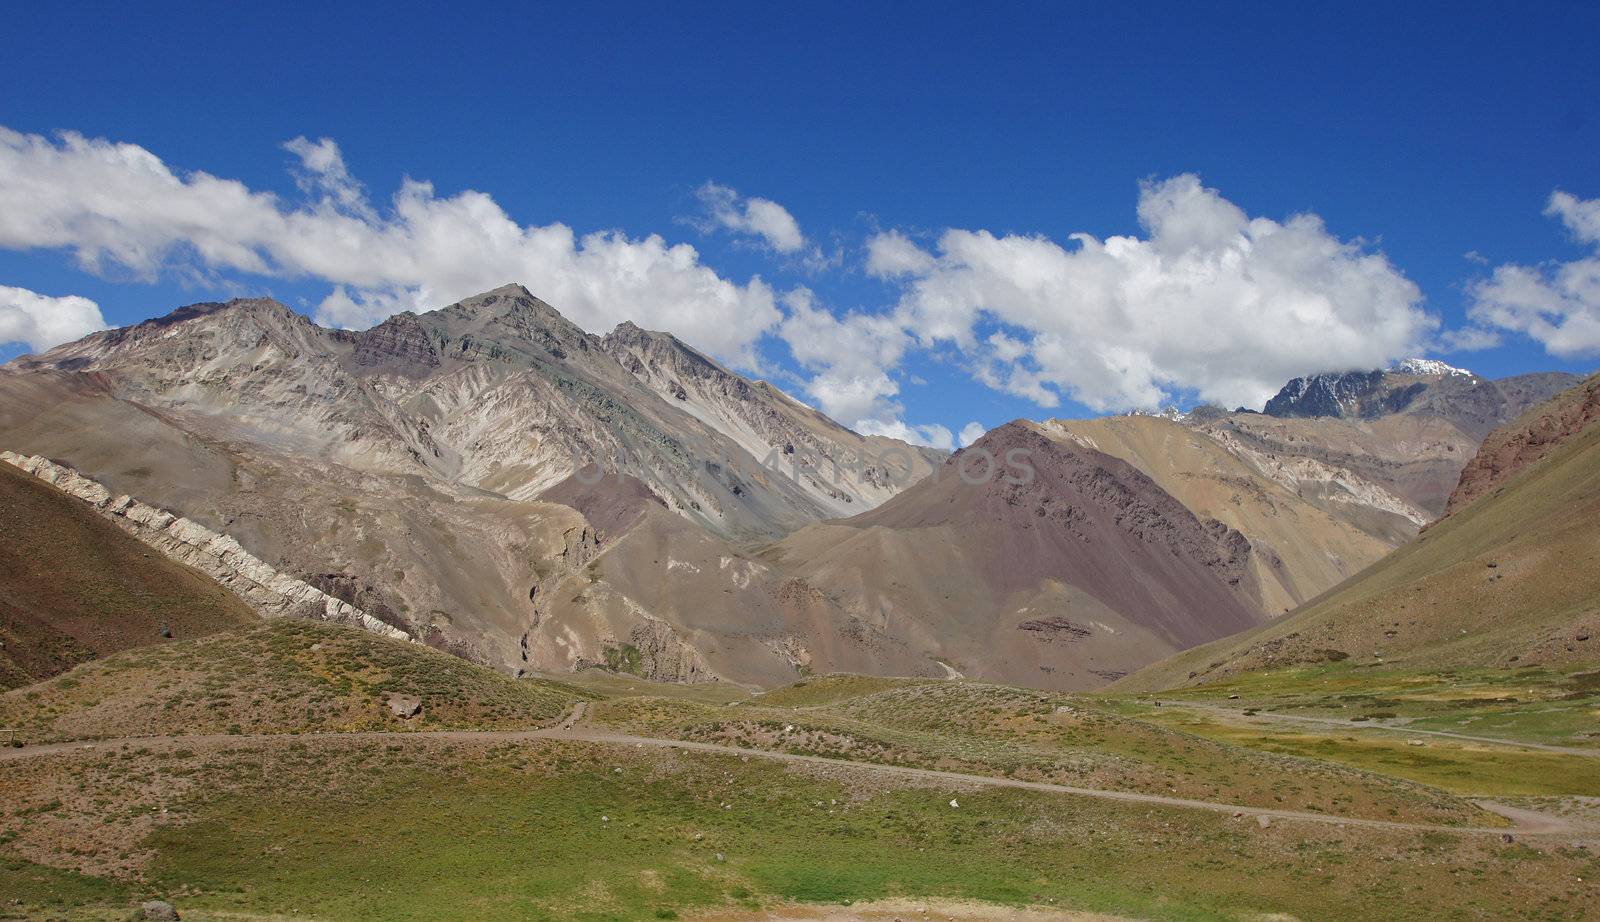 Landscape within the Aconcagua National Parc, Andes Mountains, Argentina